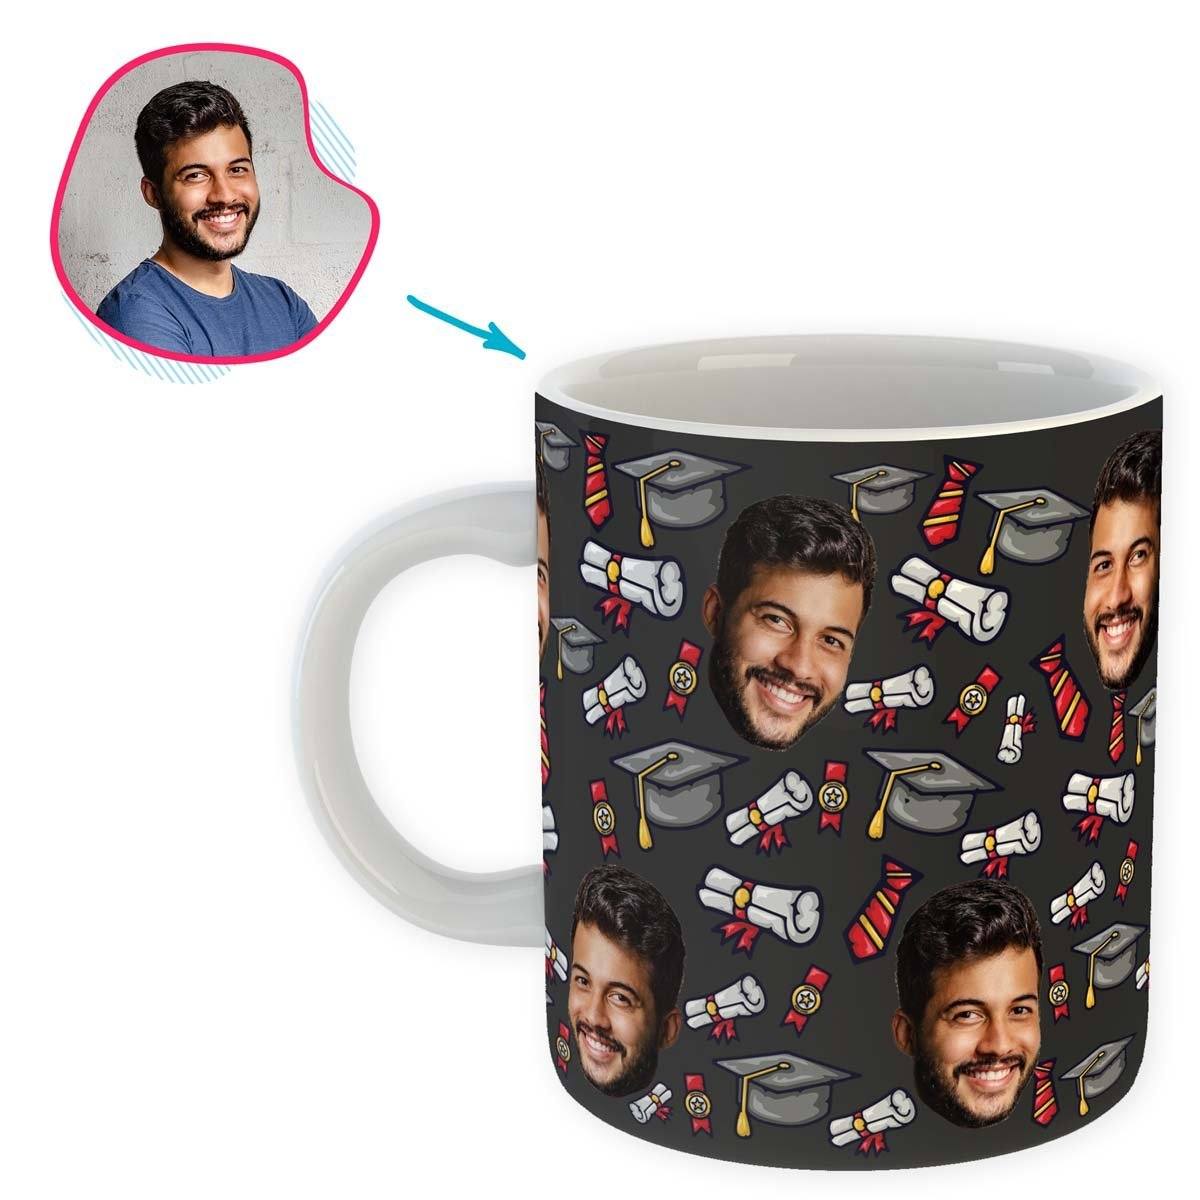 Dark Students & Graduates personalized mug with photo of face printed on it